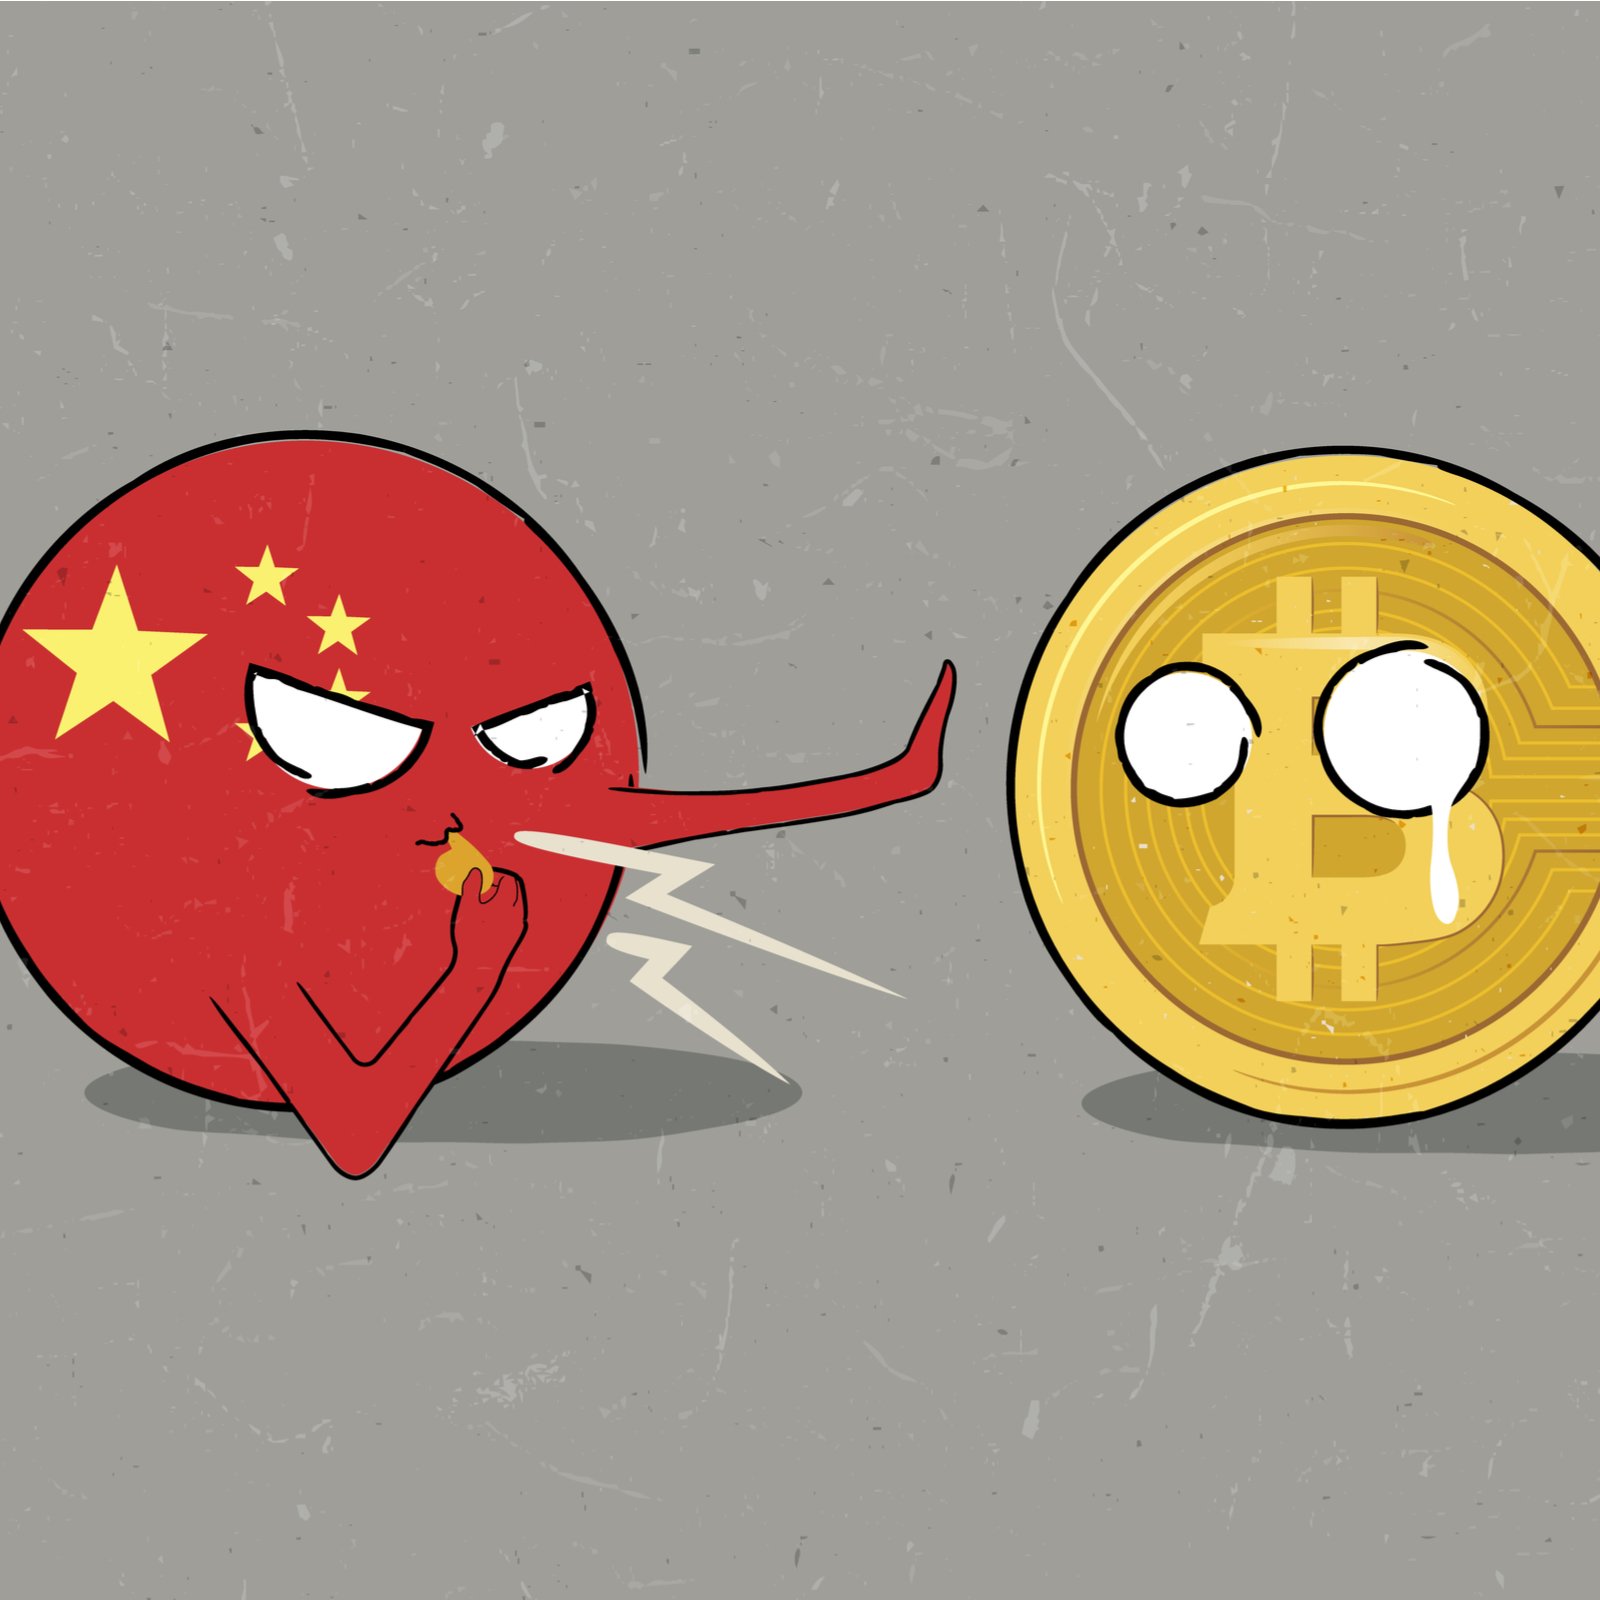 Study Argues Chinese Mining Centralization Poses Threat to Bitcoin Network